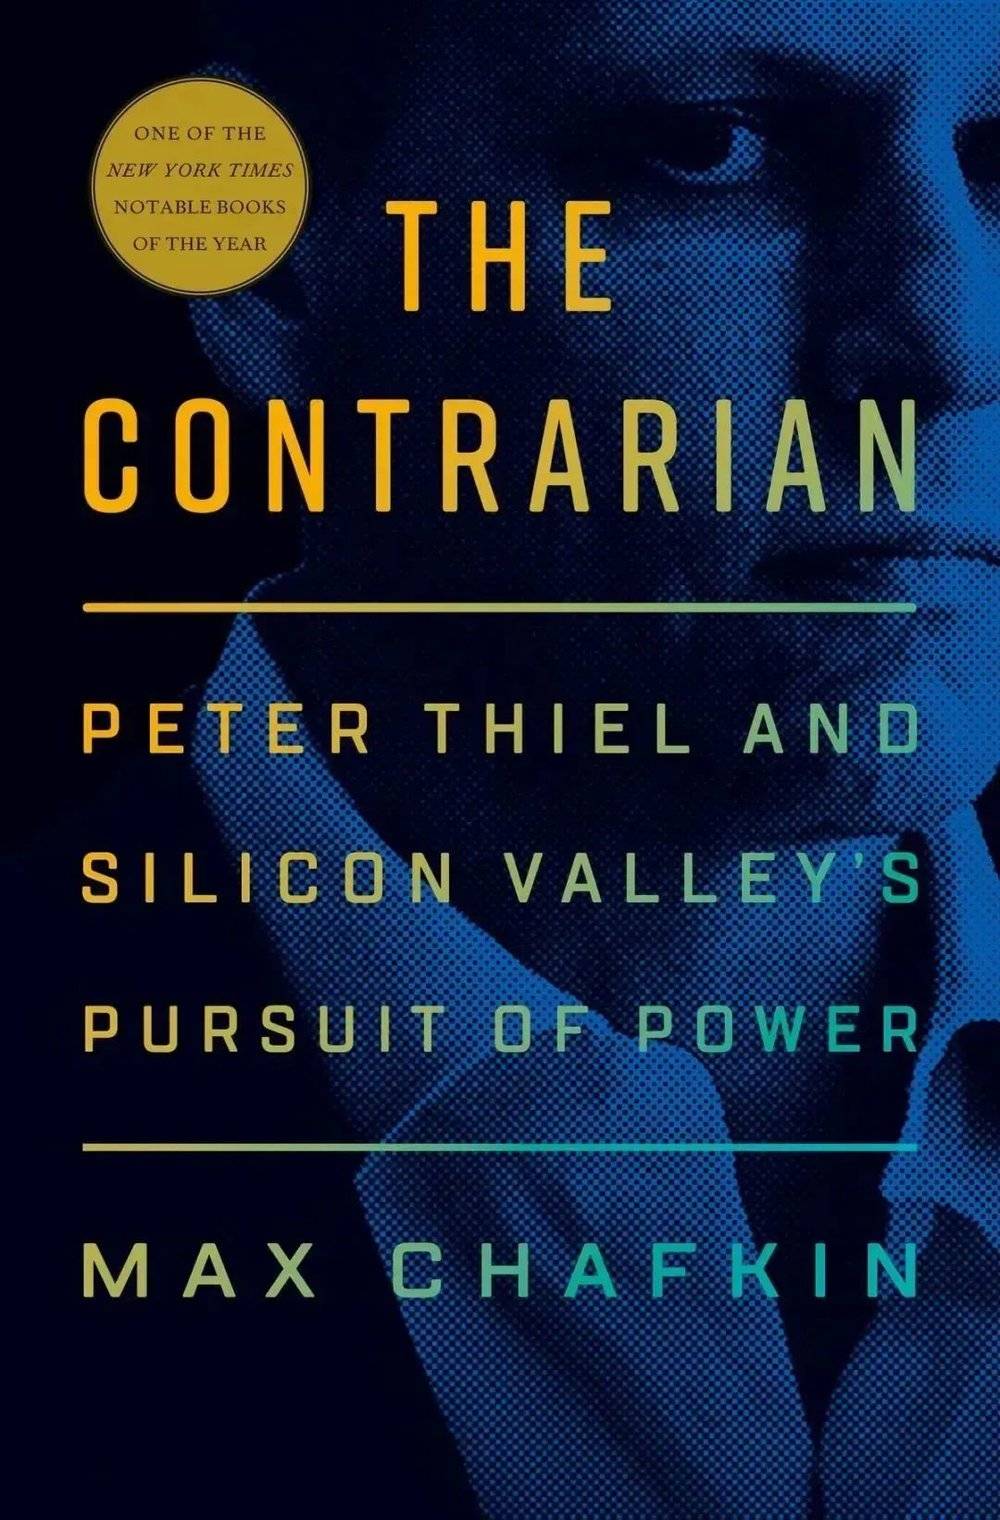 《The Contrarian》（逆向思考者，中信即将出版）